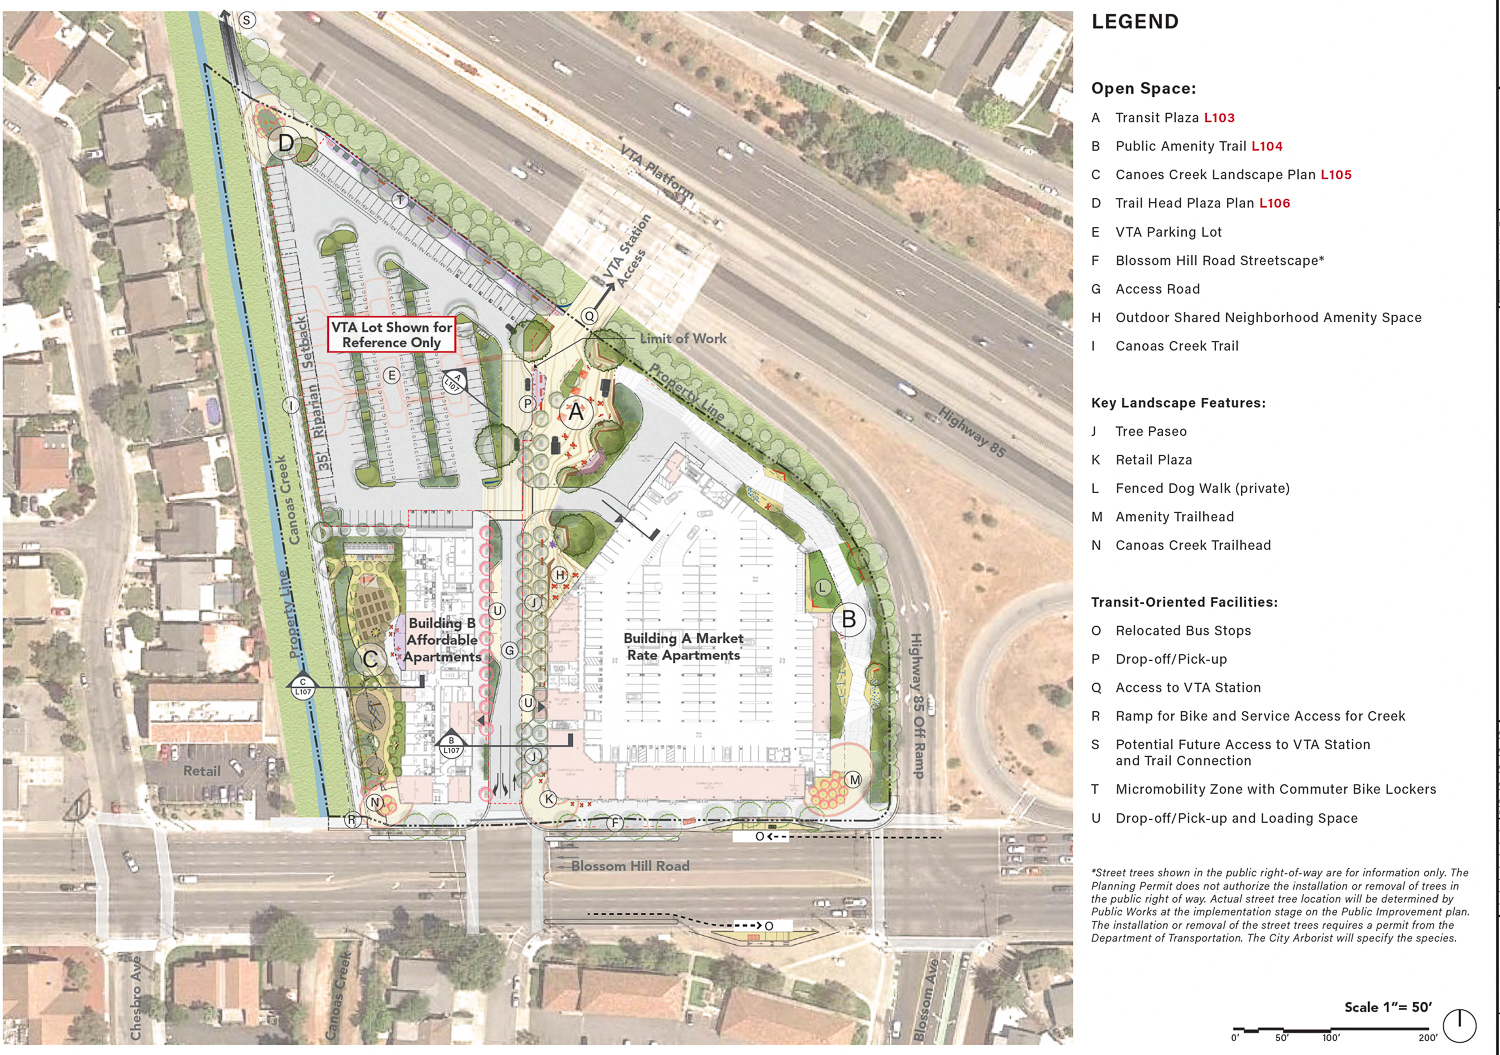 605 Blossom Hill Road site map, illustration by HMH